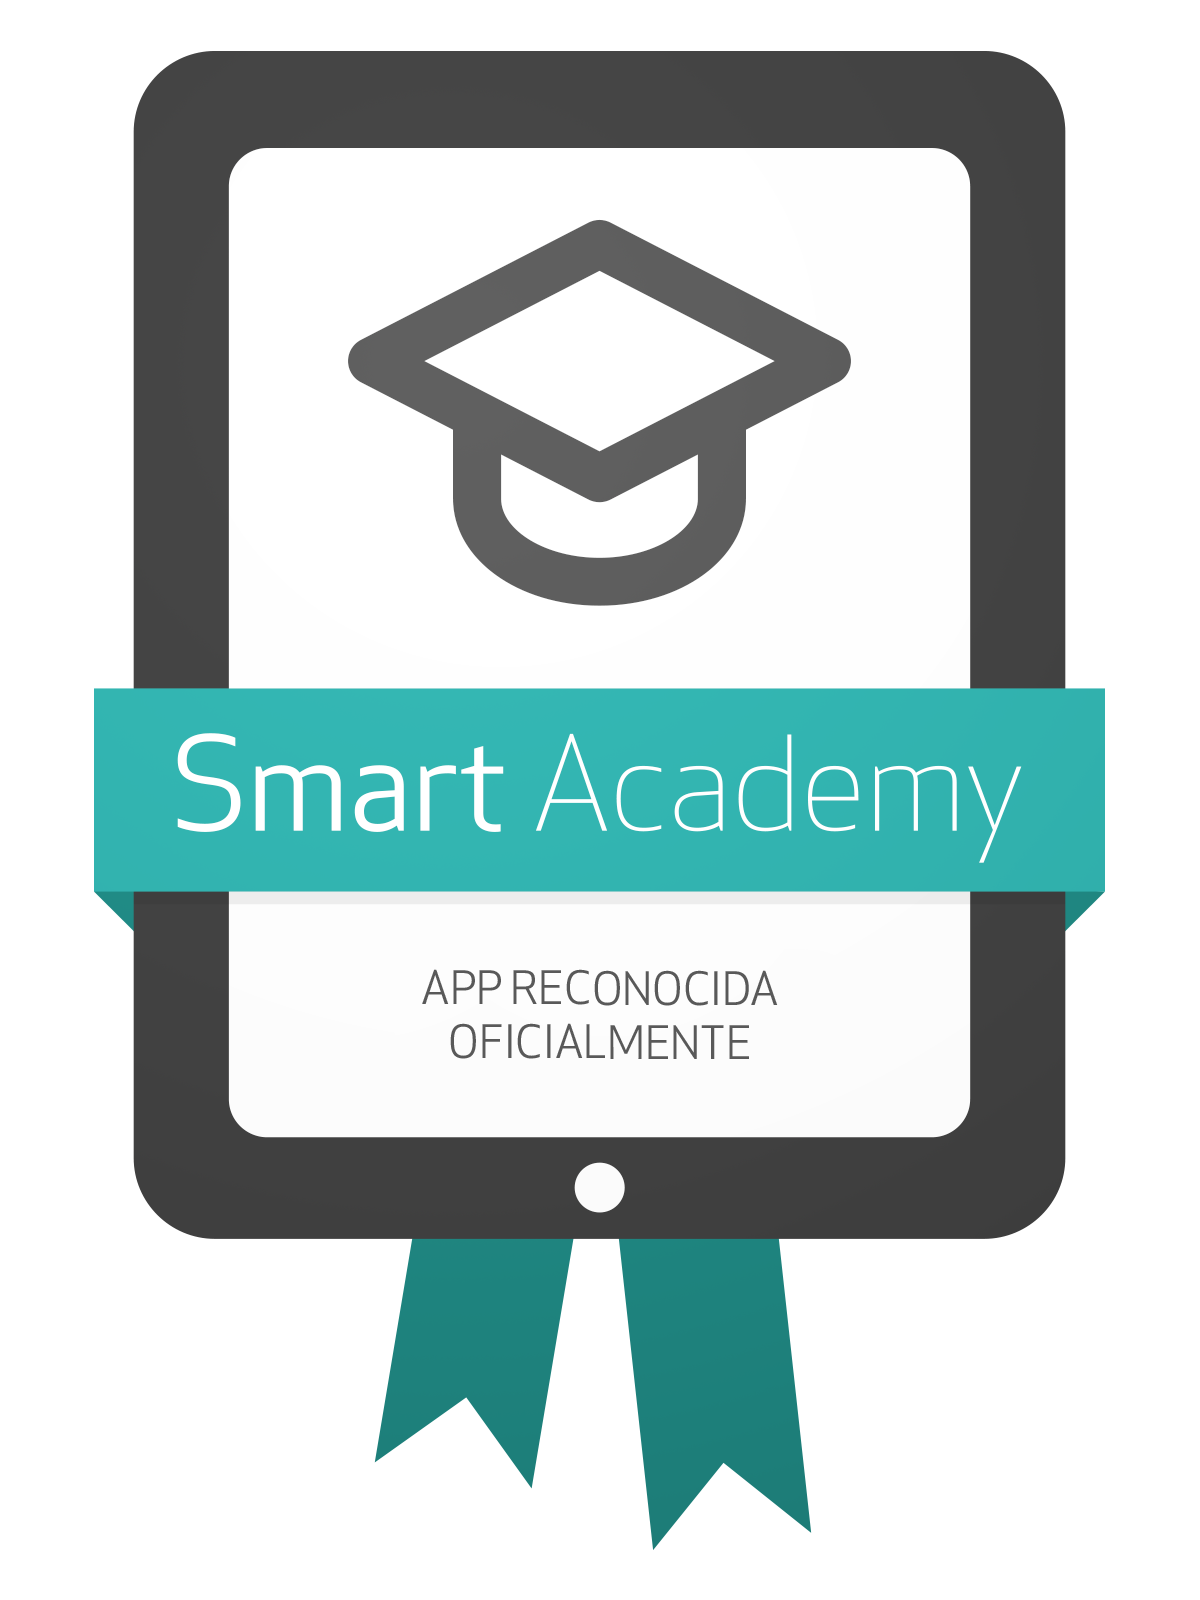 Lee Paso a Paso was included in Smart Academy education project